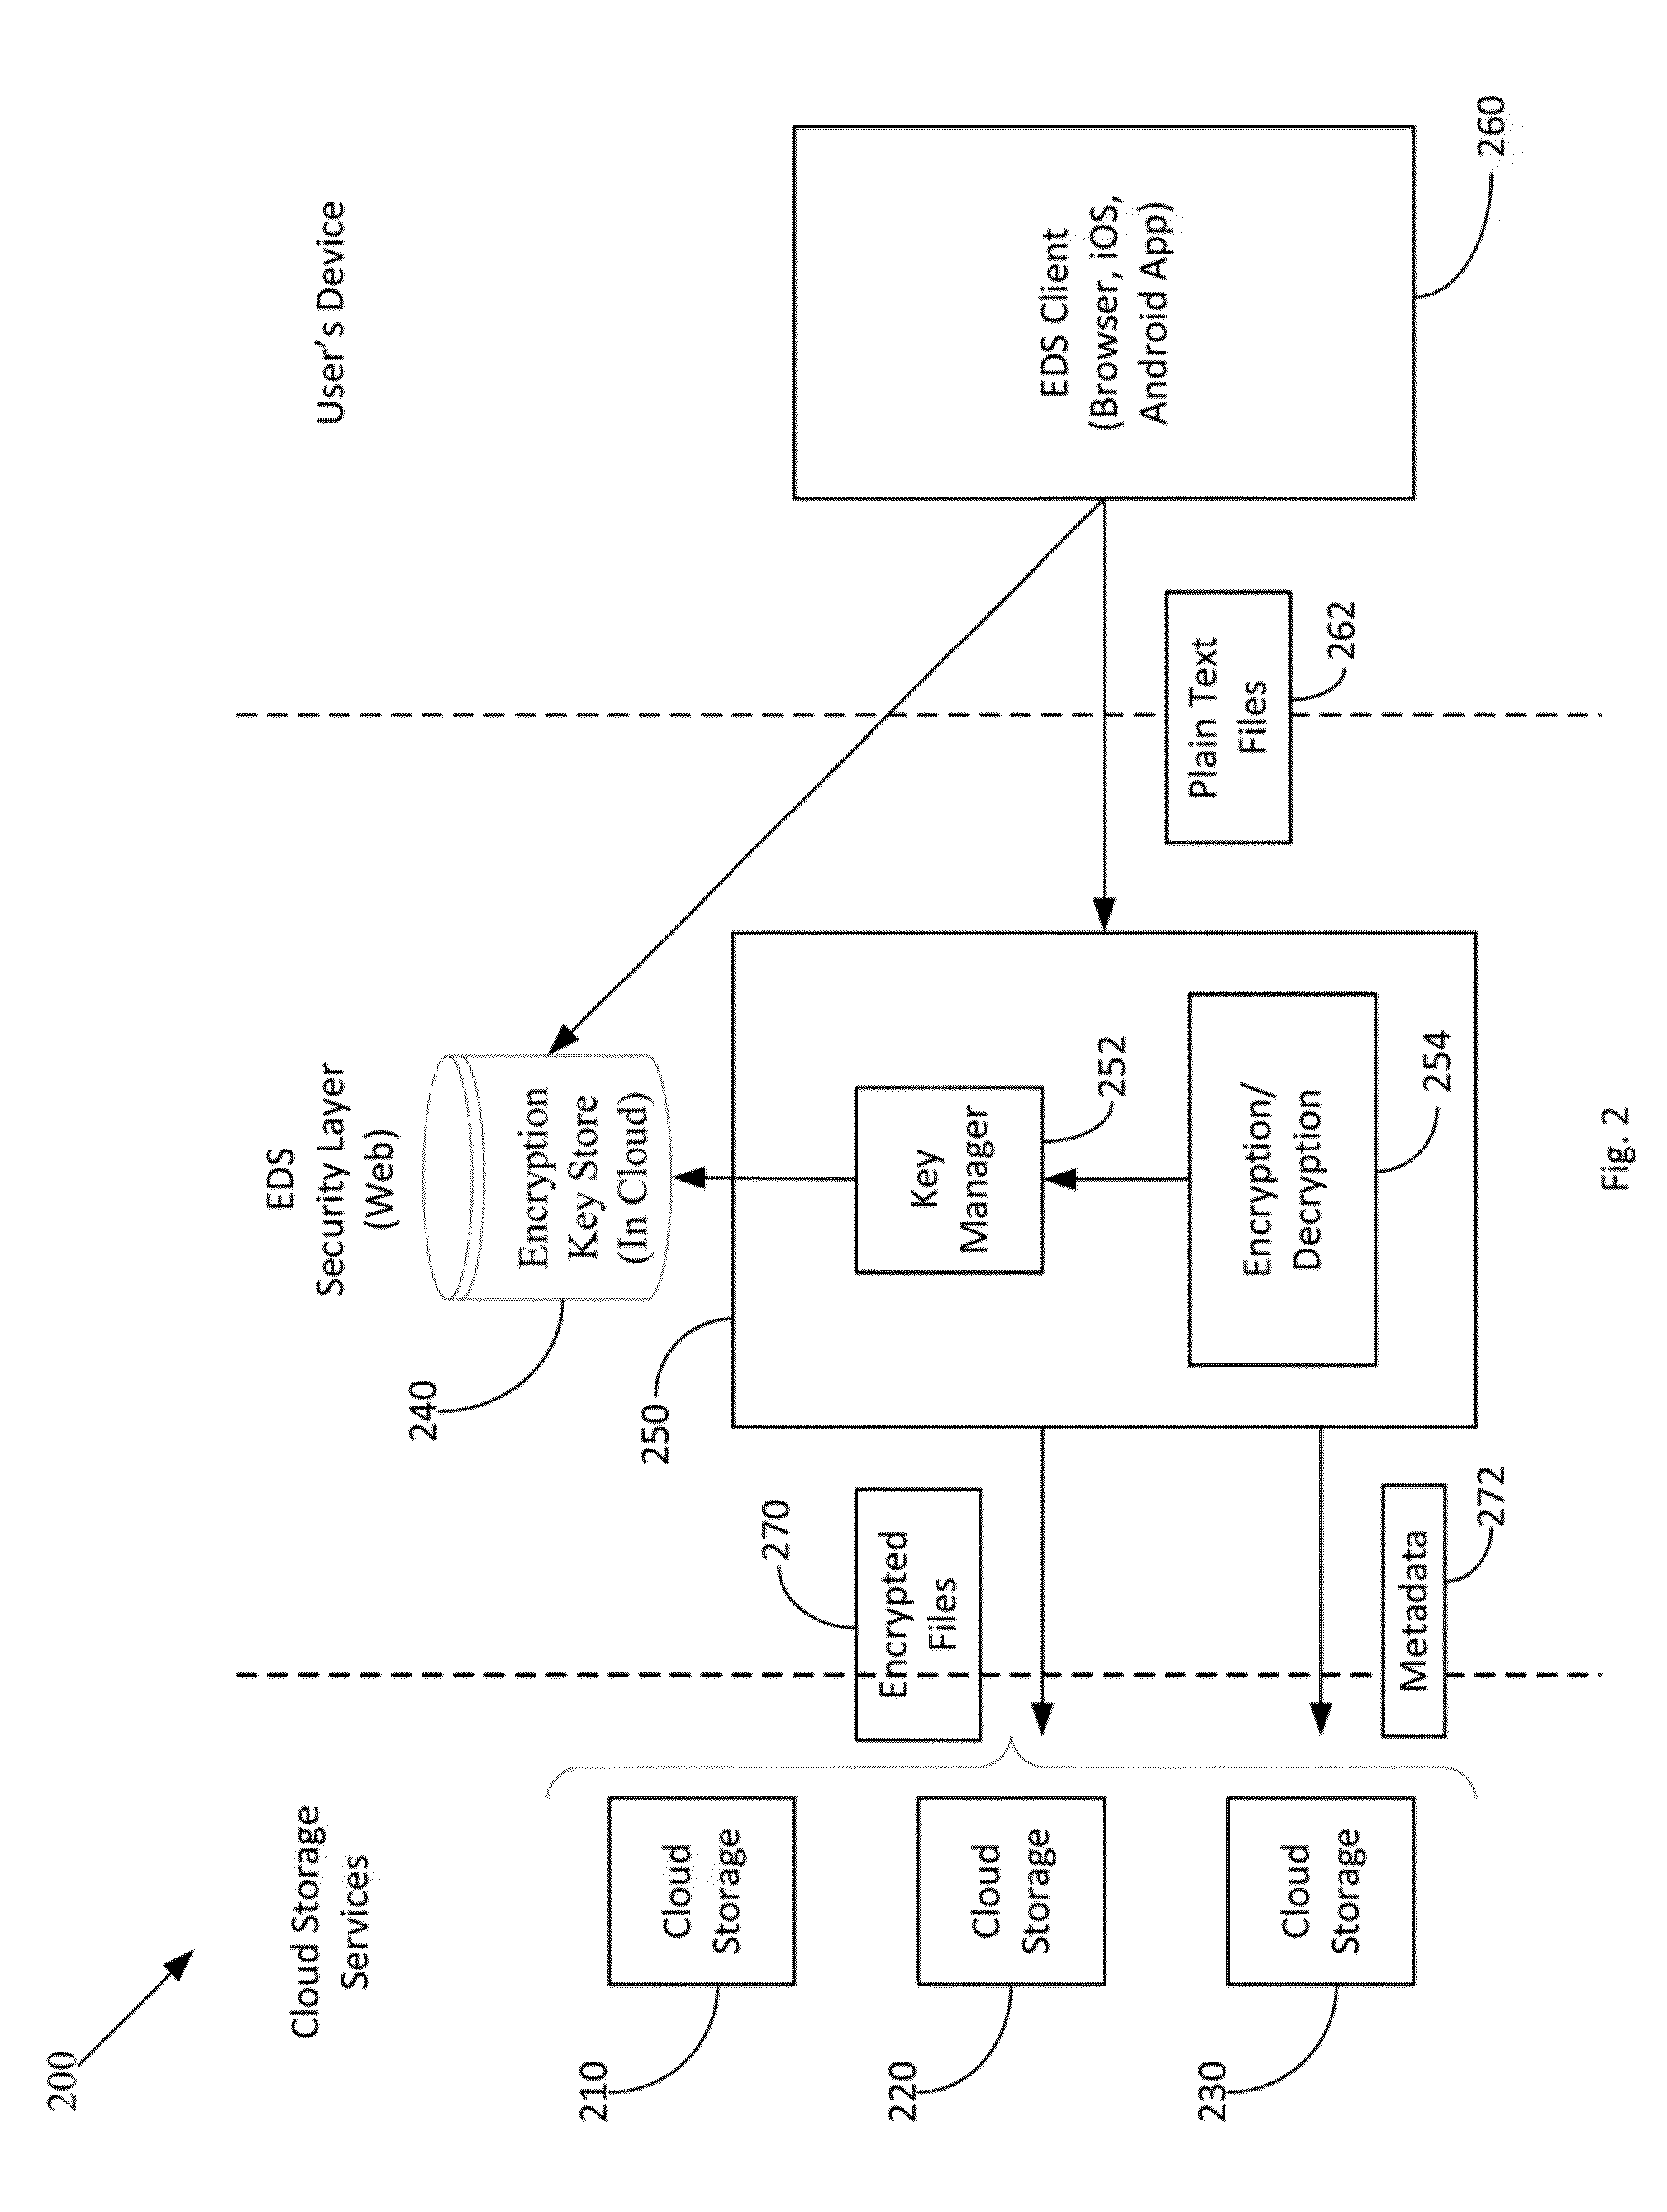 Method and apparatus for securing sensitive data in a cloud storage system